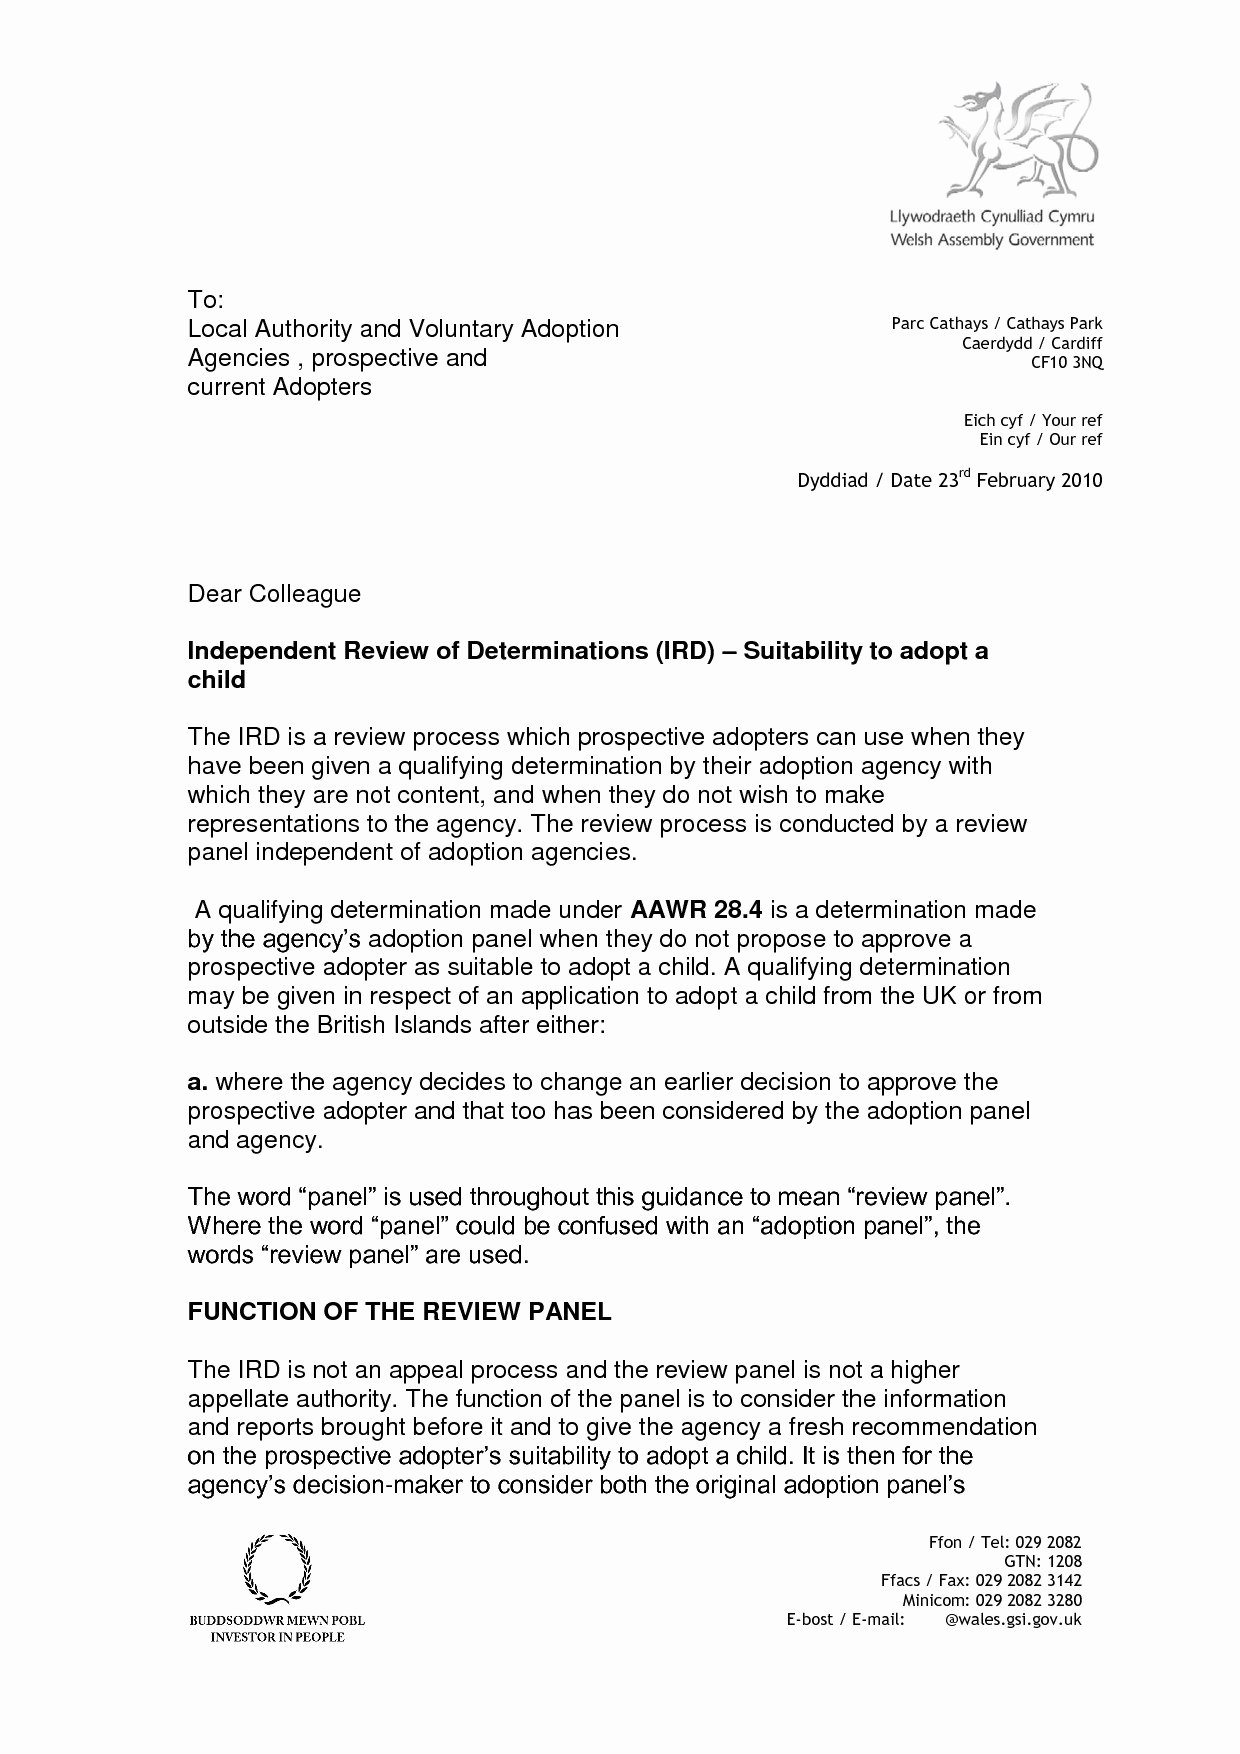 Letters Of Recommendation for Adoption Lovely New 20 Job Re Mendation Letter for A Friend